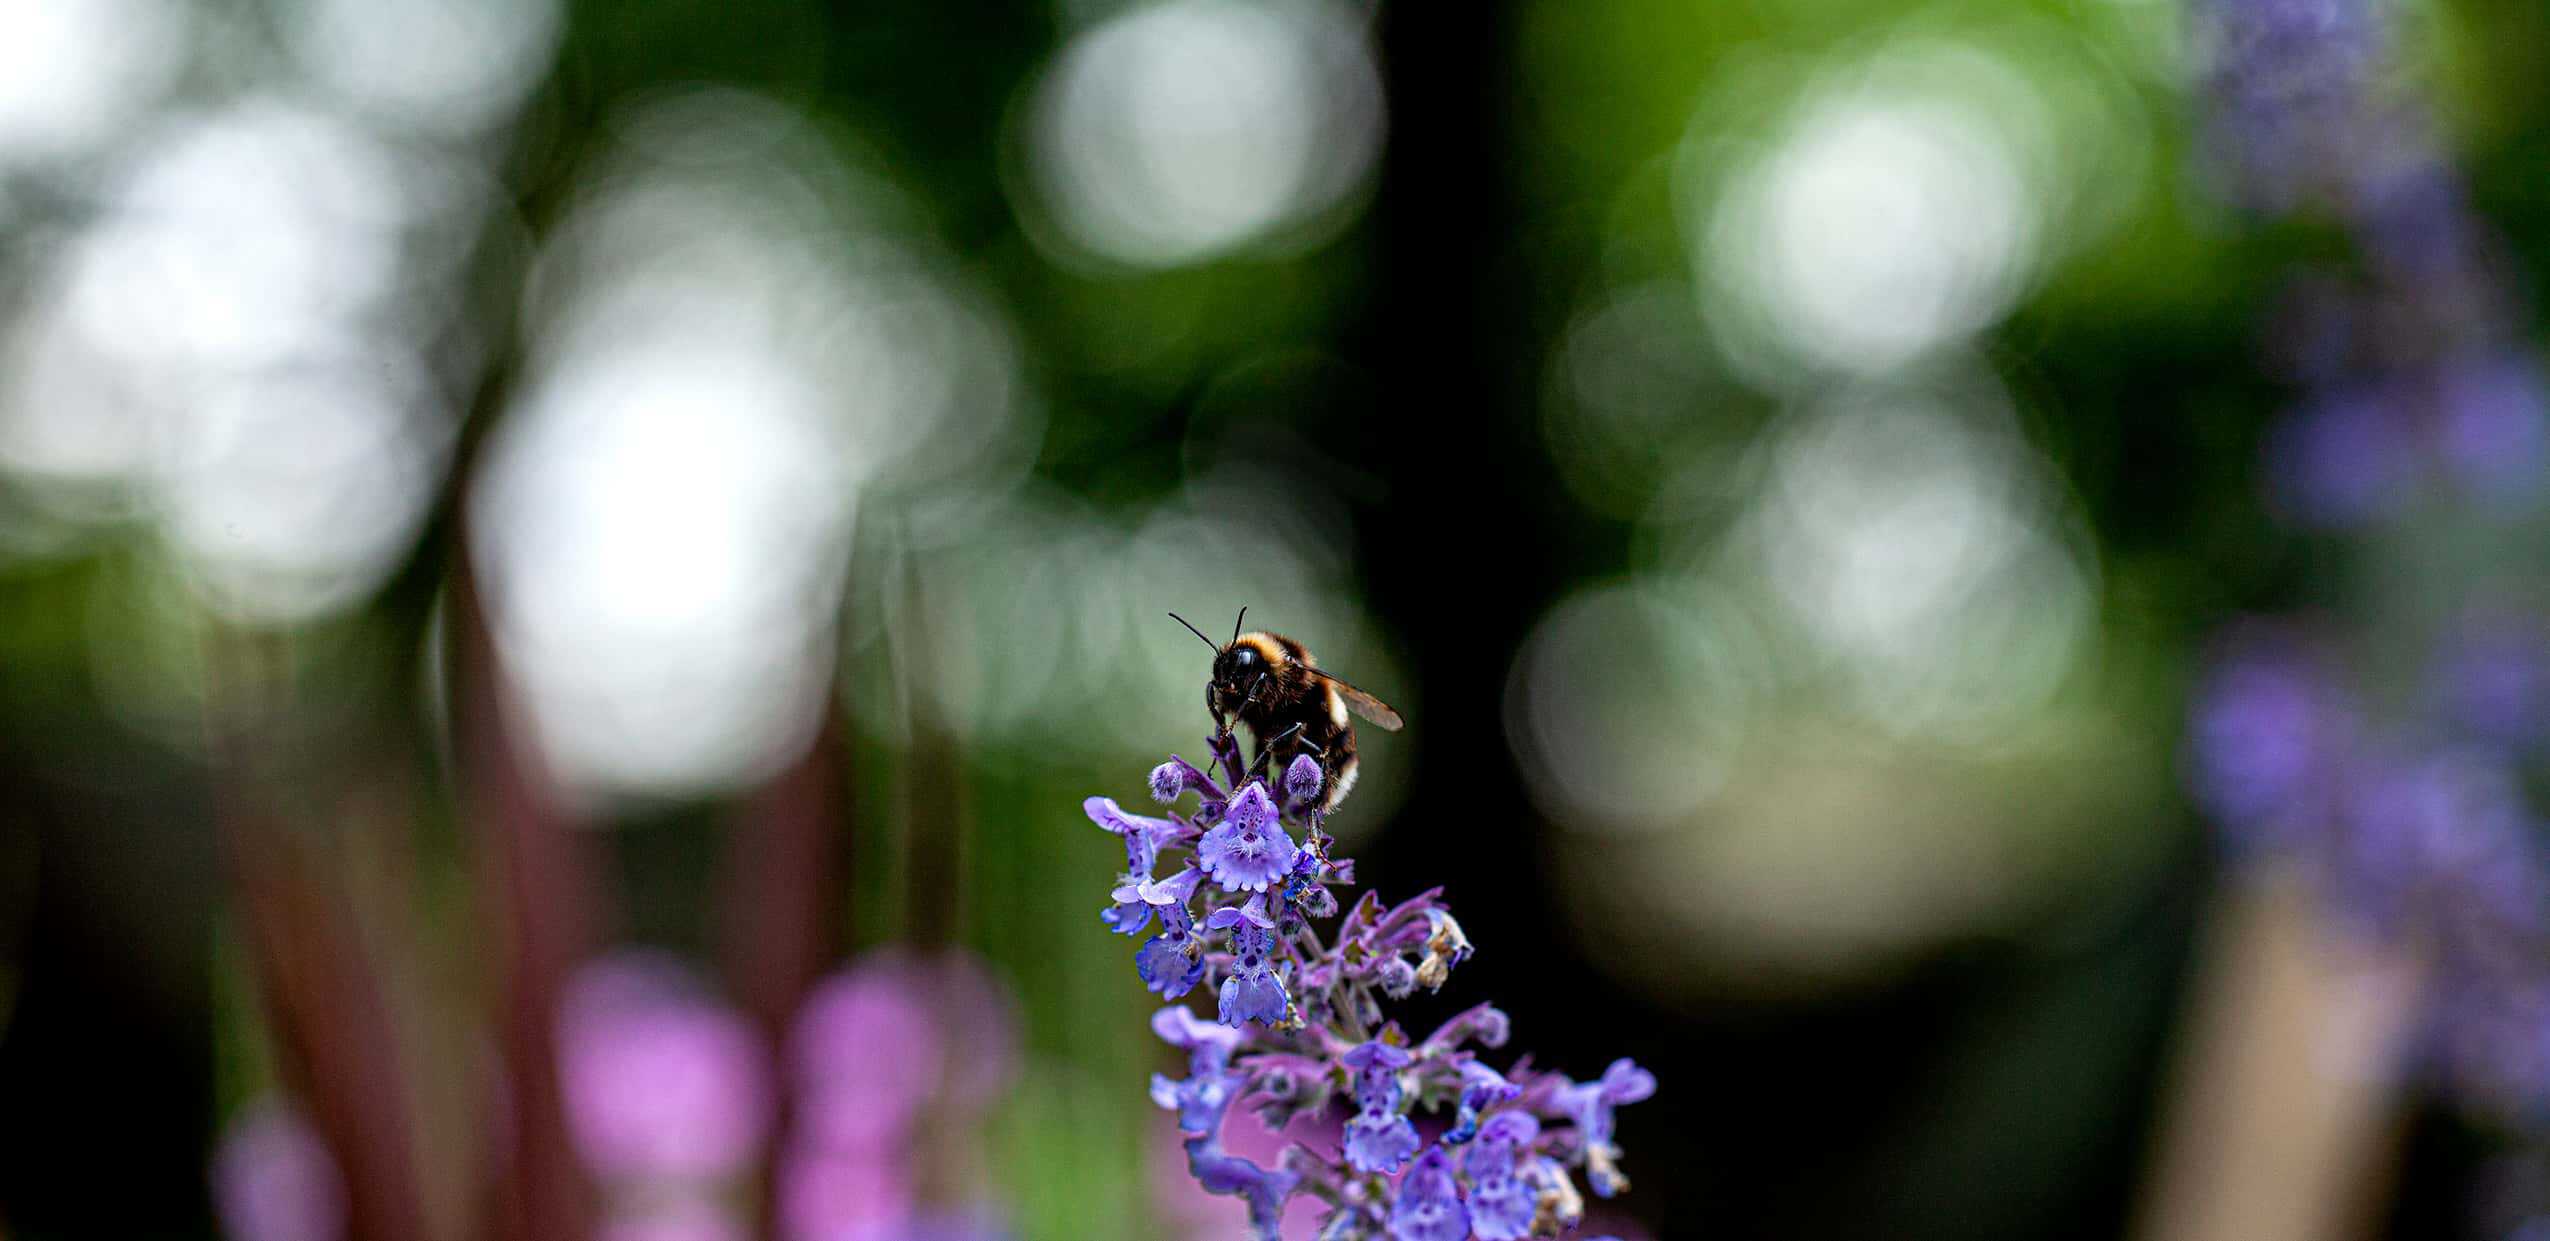 A bee in the flower garden at the Nursery